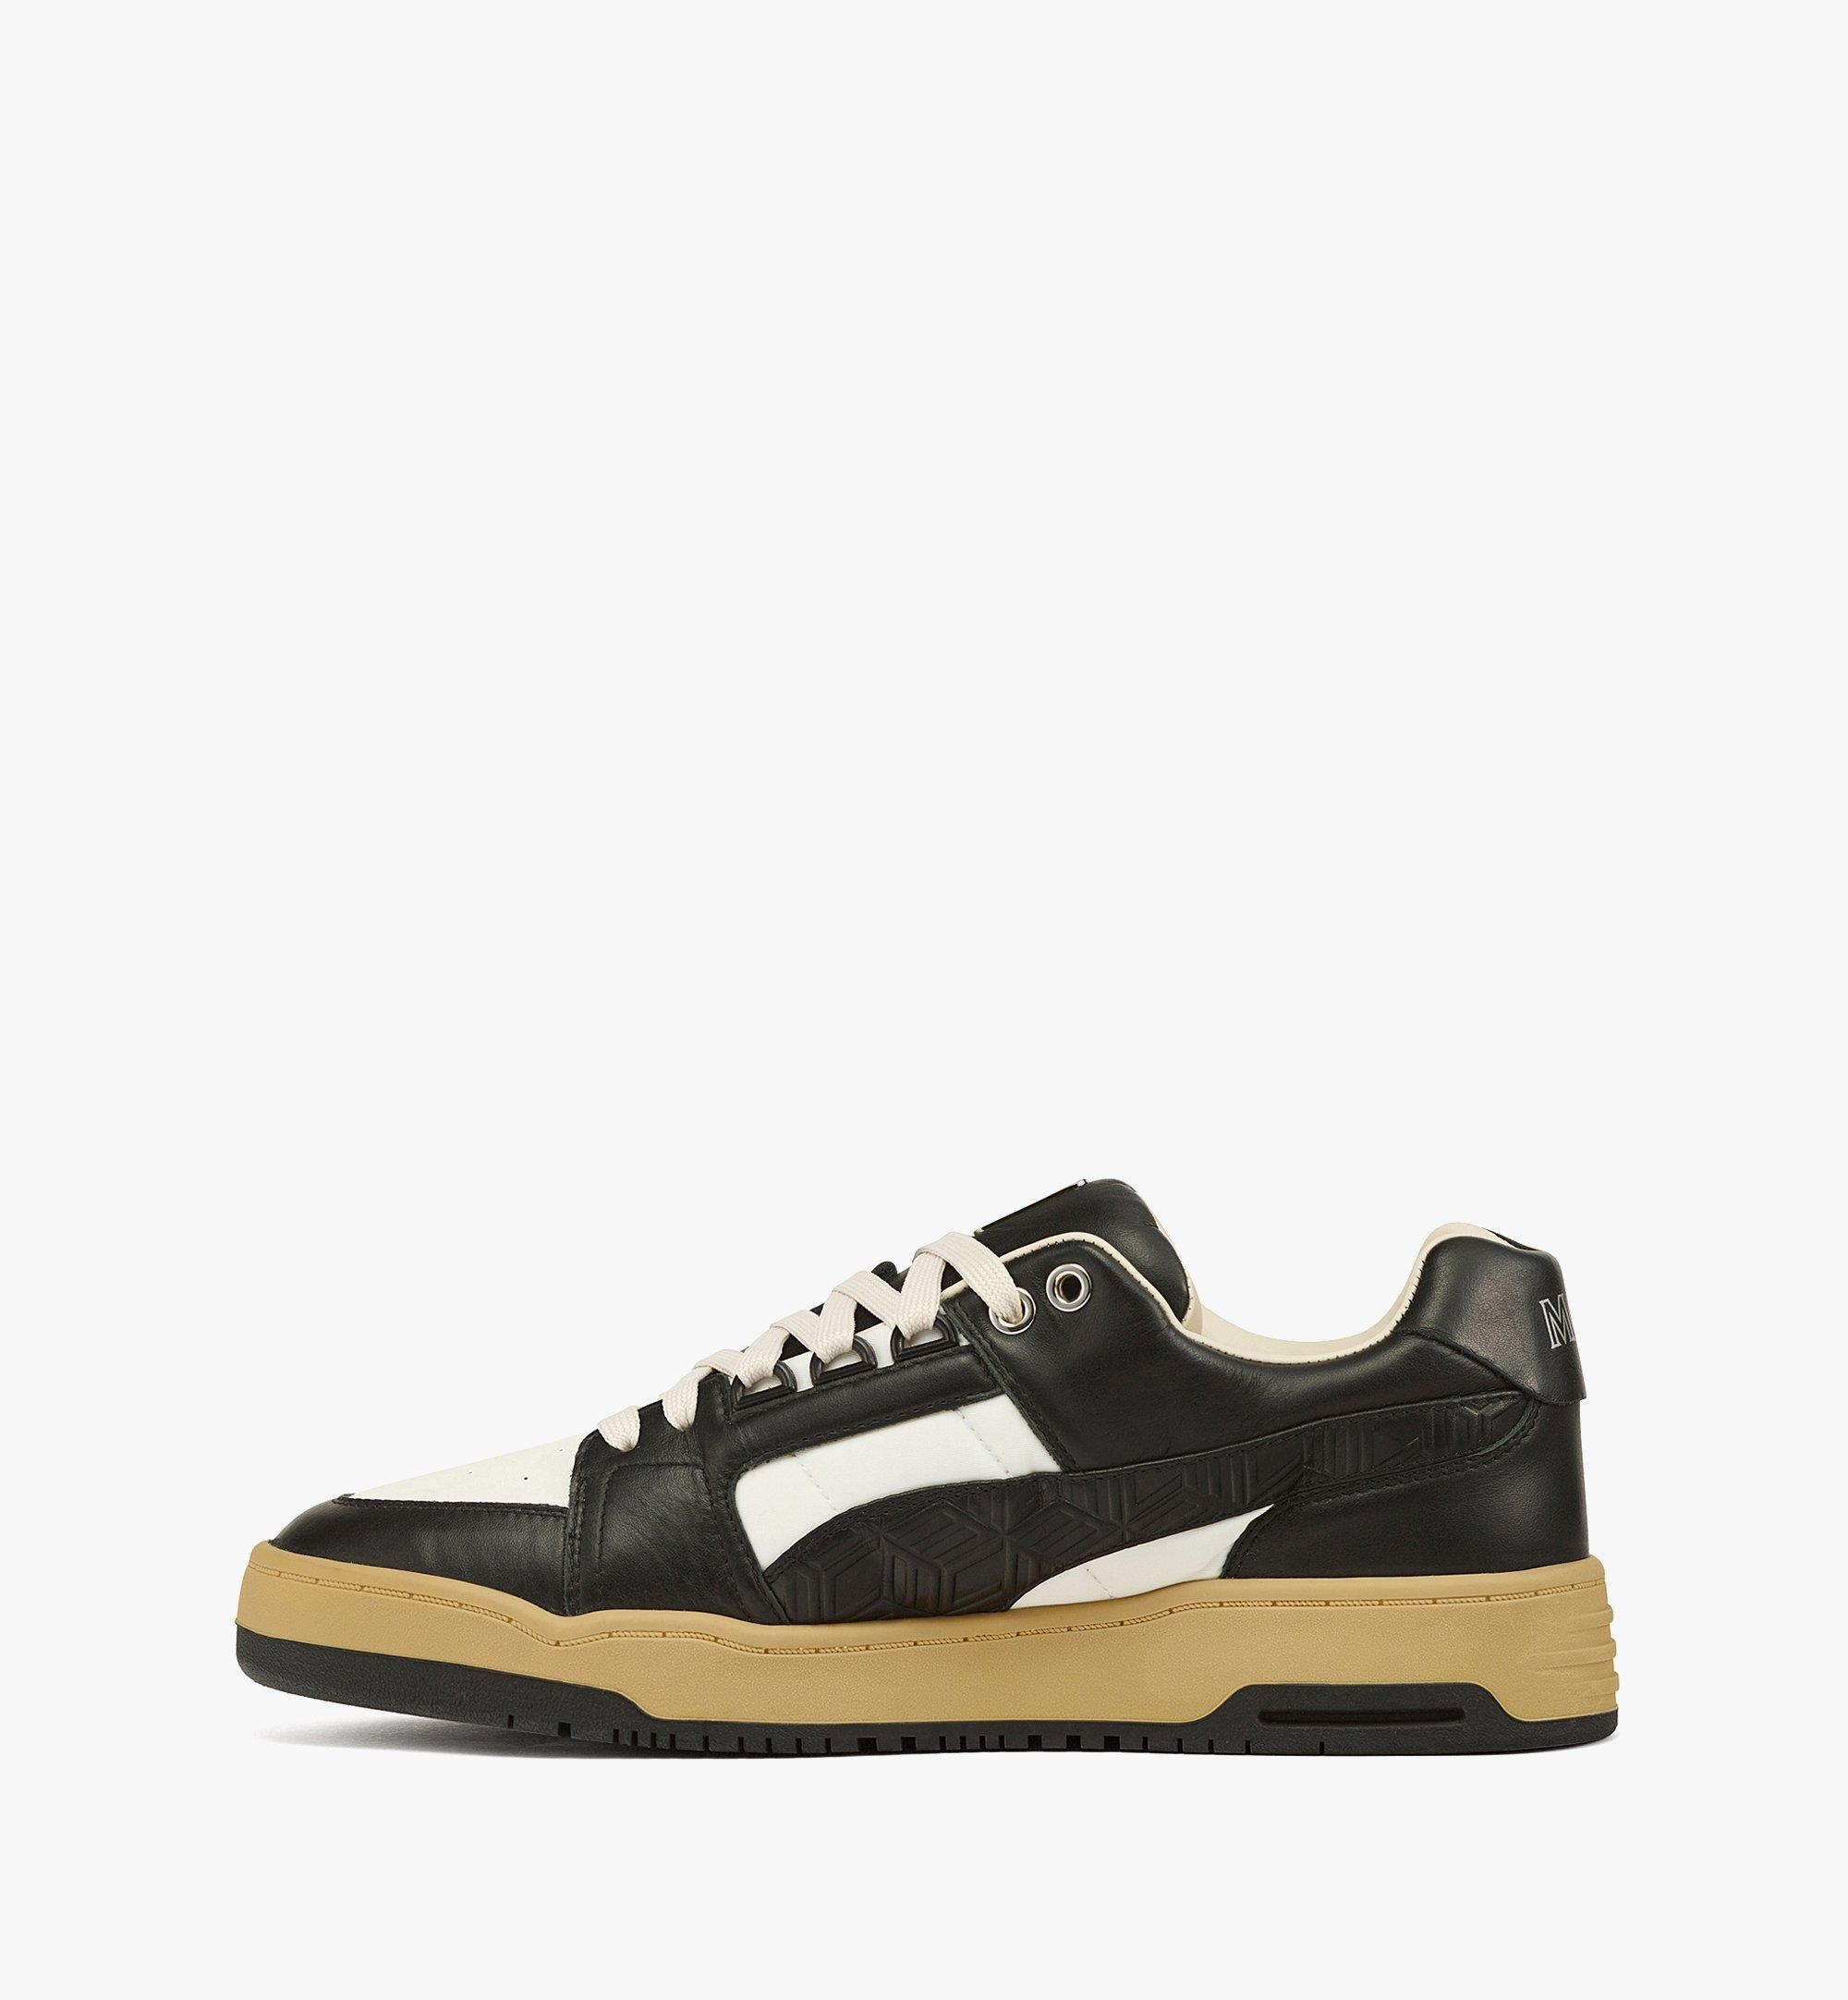 MCM x PUMA Slipstream Sneakers in Cubic Leather - 3